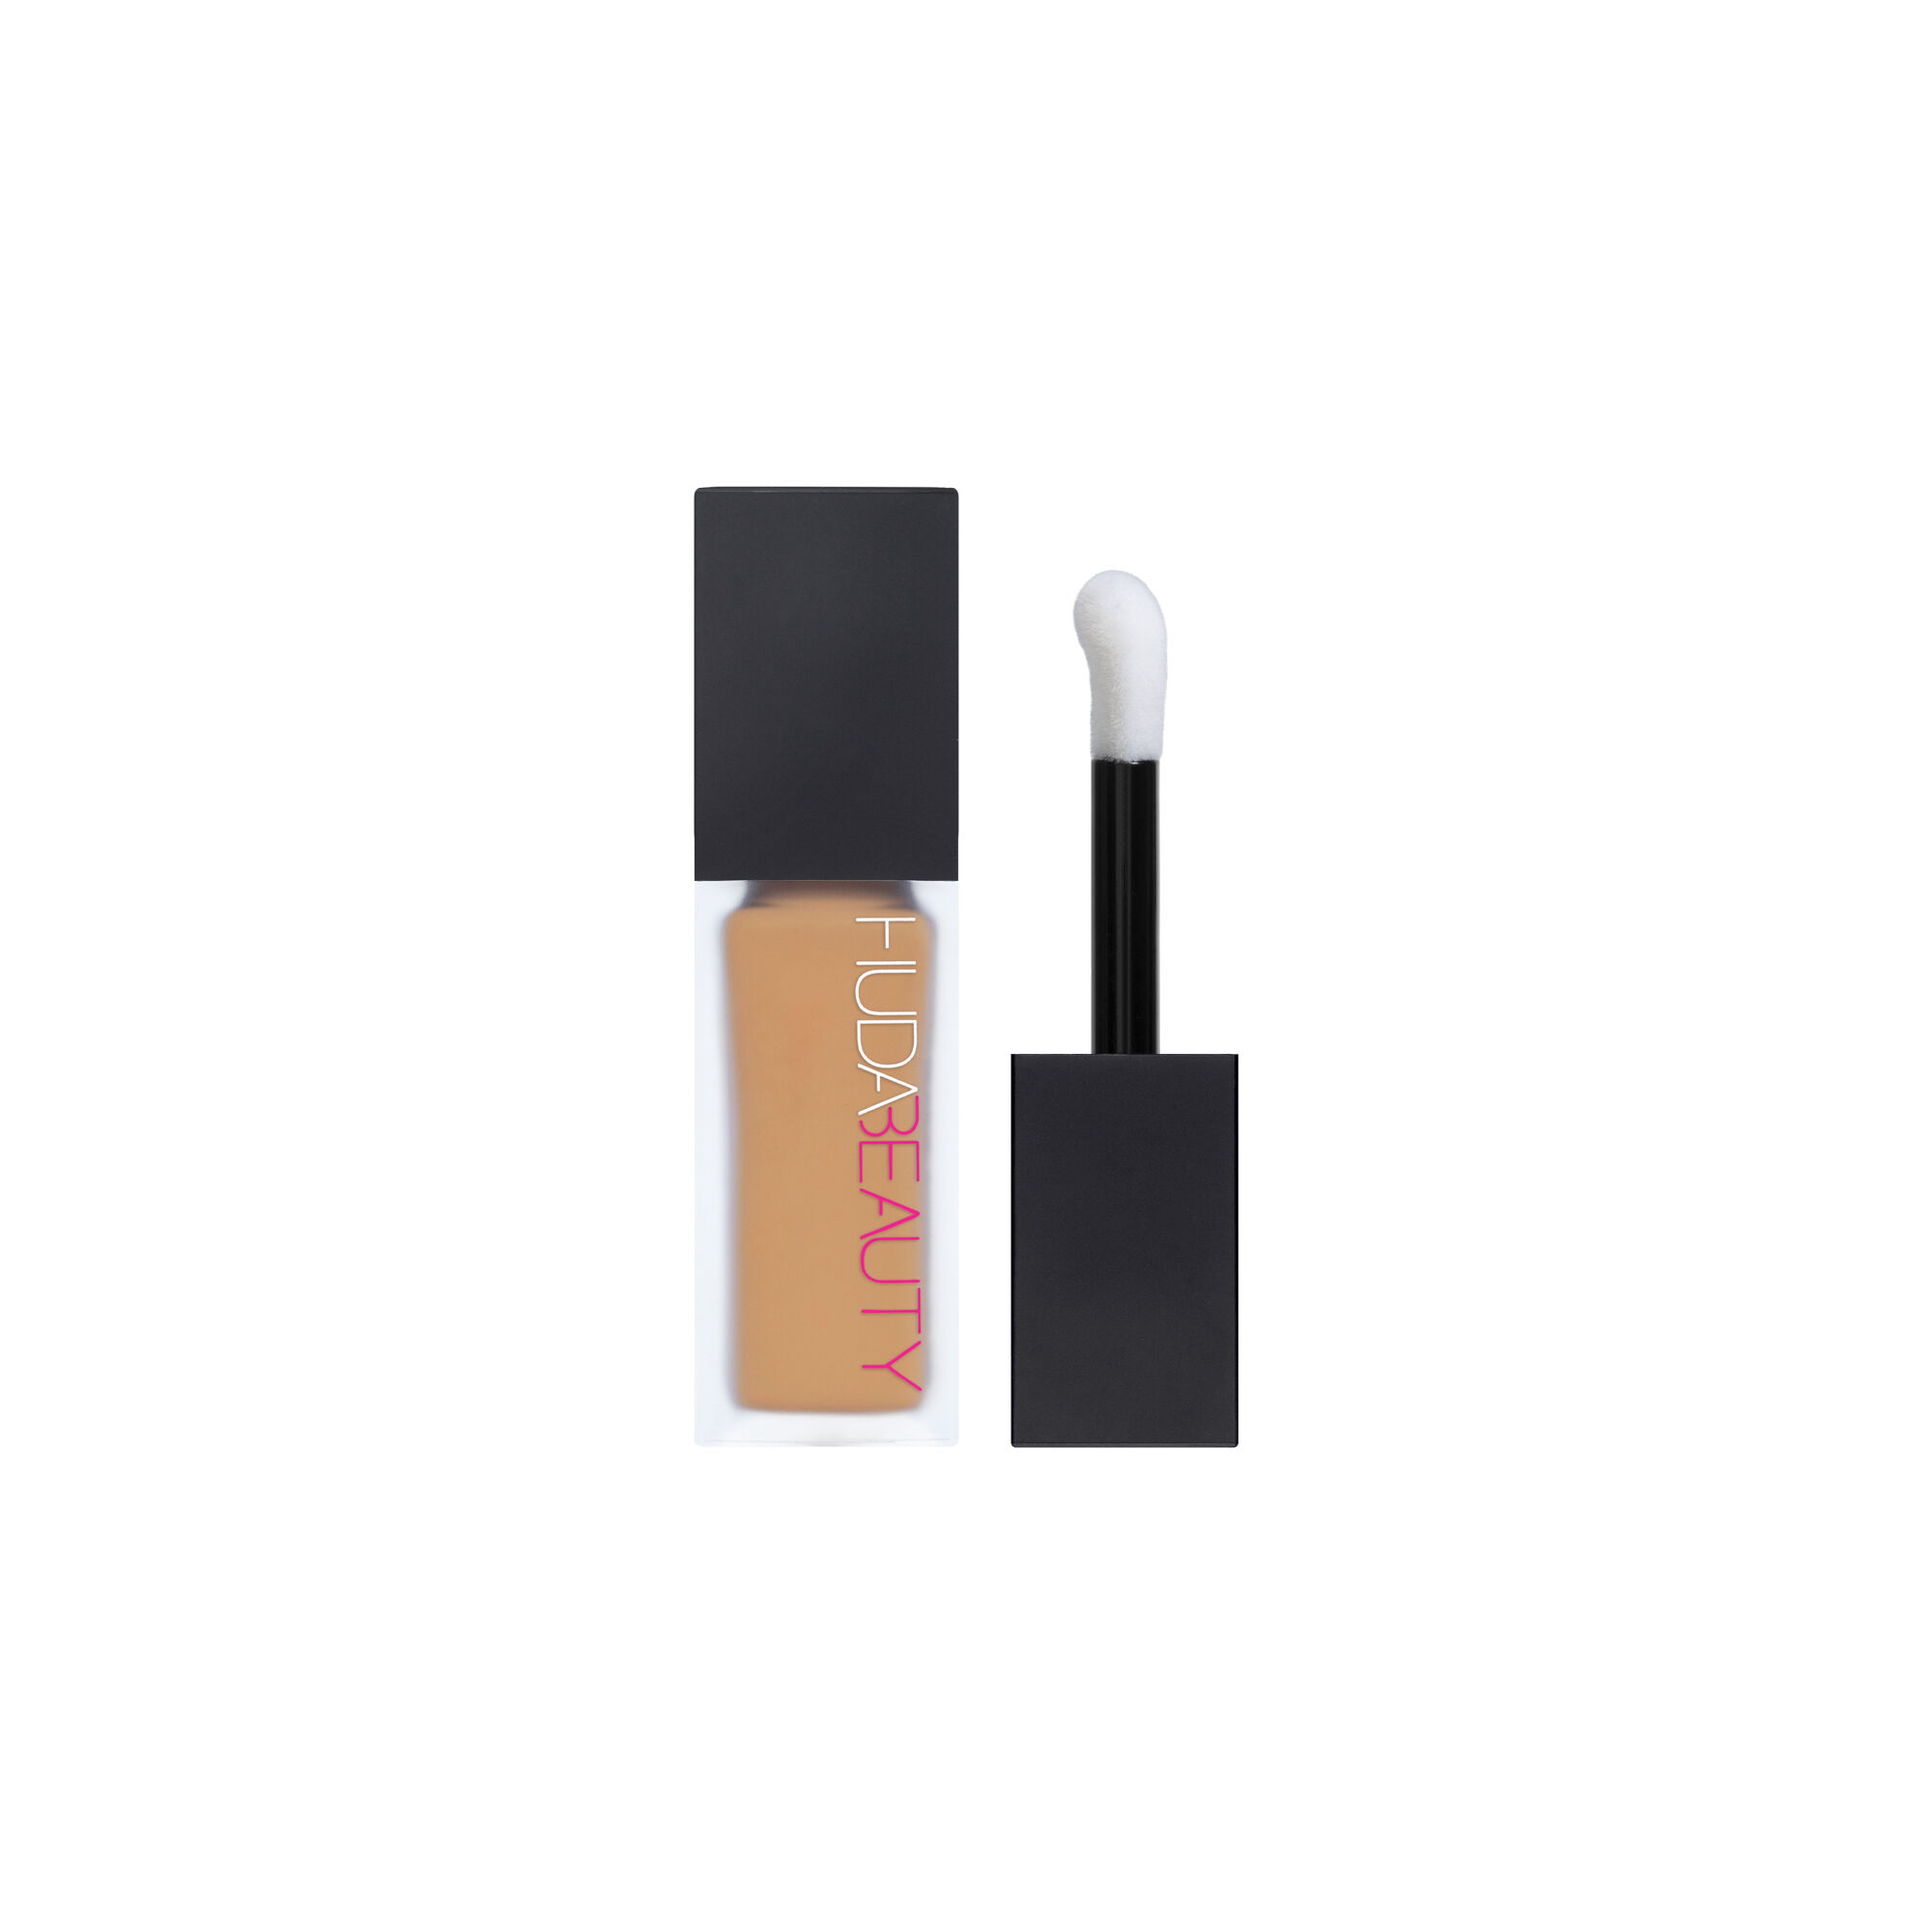 Huda Beauty Faux Filter Concealer Toasted Almond 5.3 In Toasted Almond 5.3g